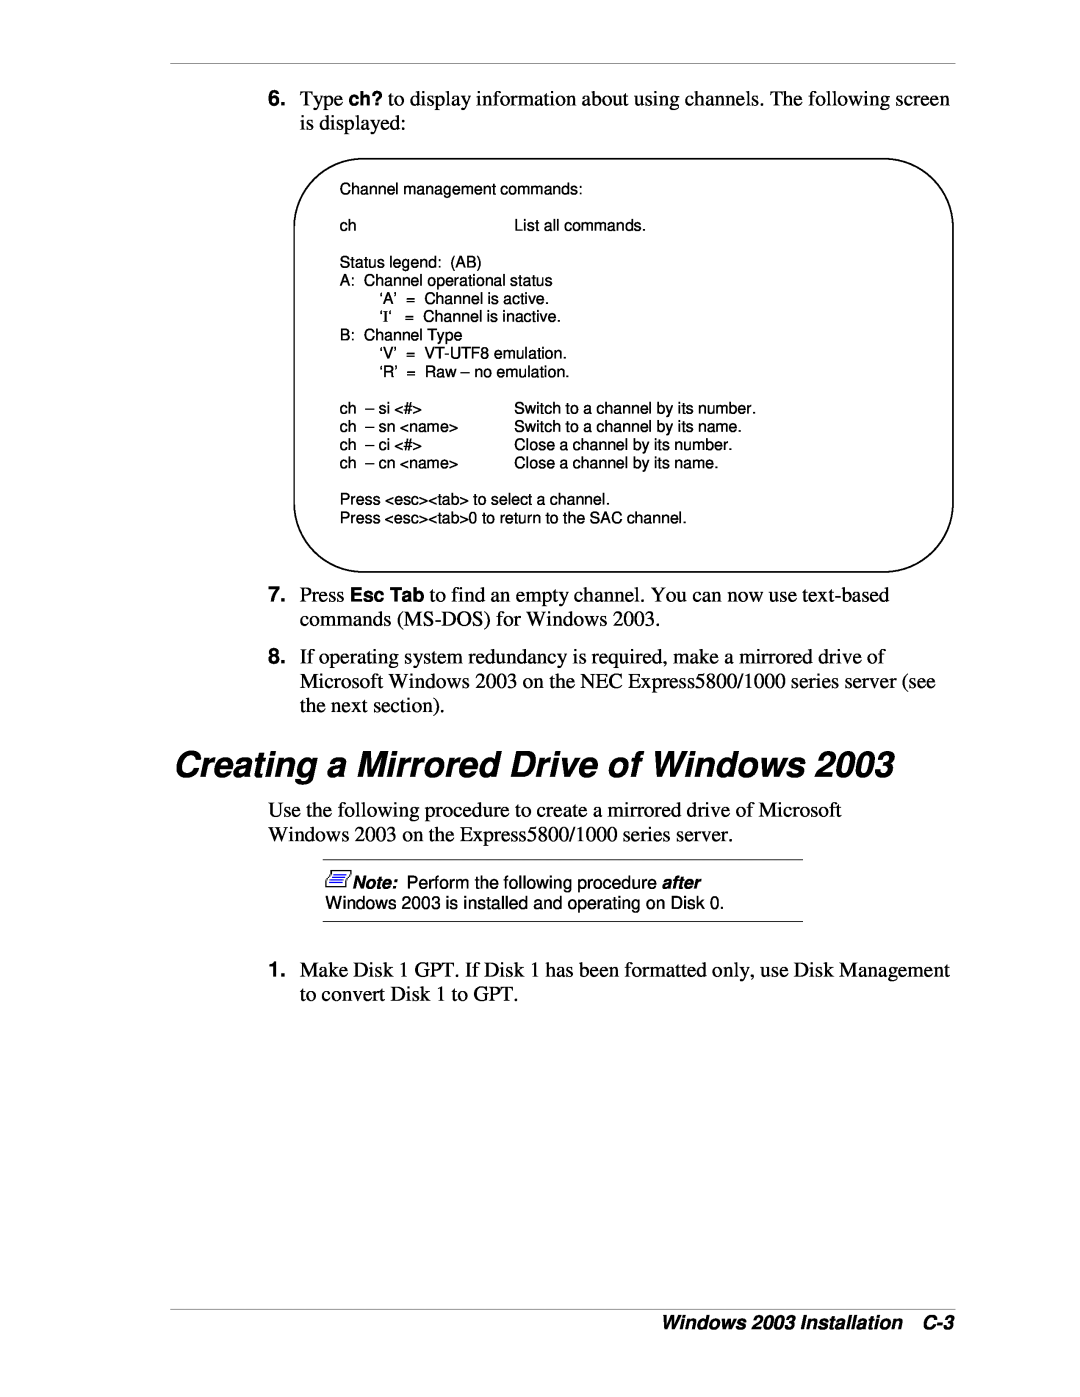 NEC 1080Xd manual Creating a Mirrored Drive of Windows 